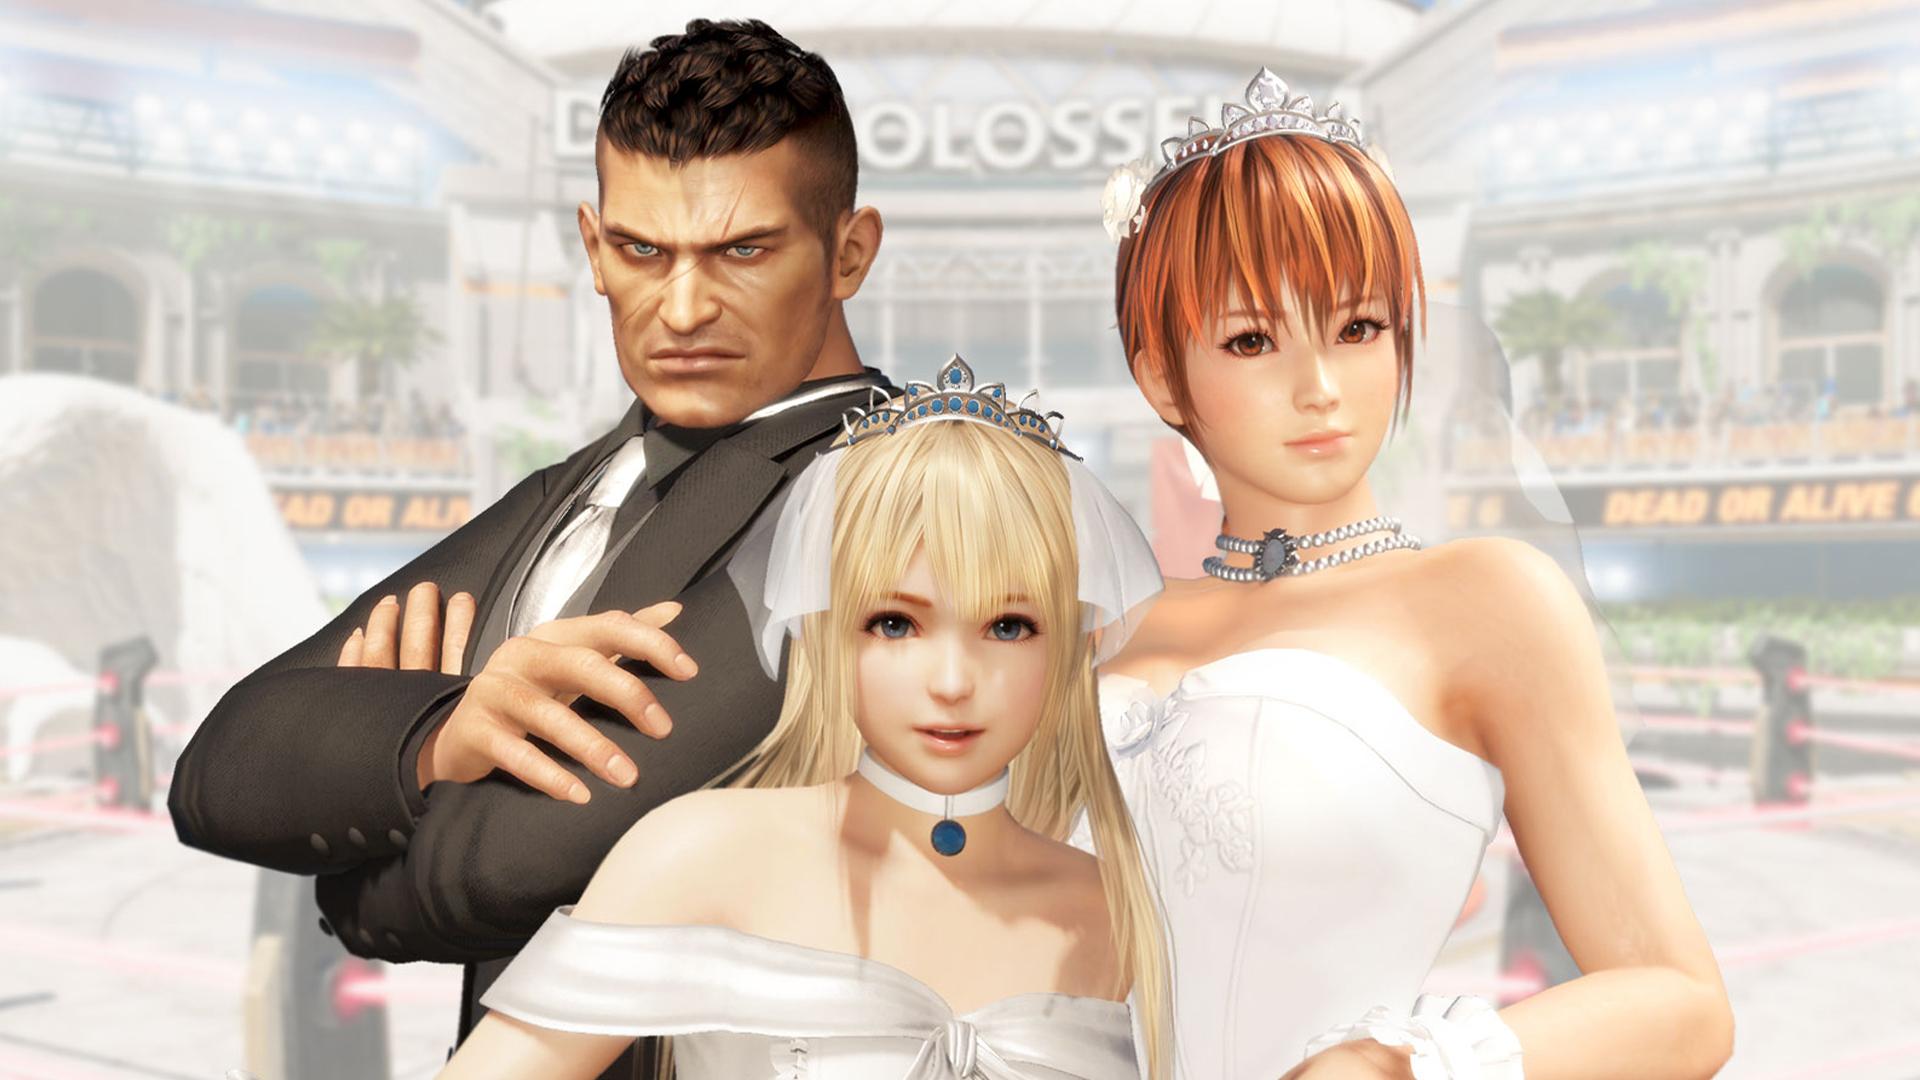 Dead or Alive 6's first season pass lasts four months, and it's $93